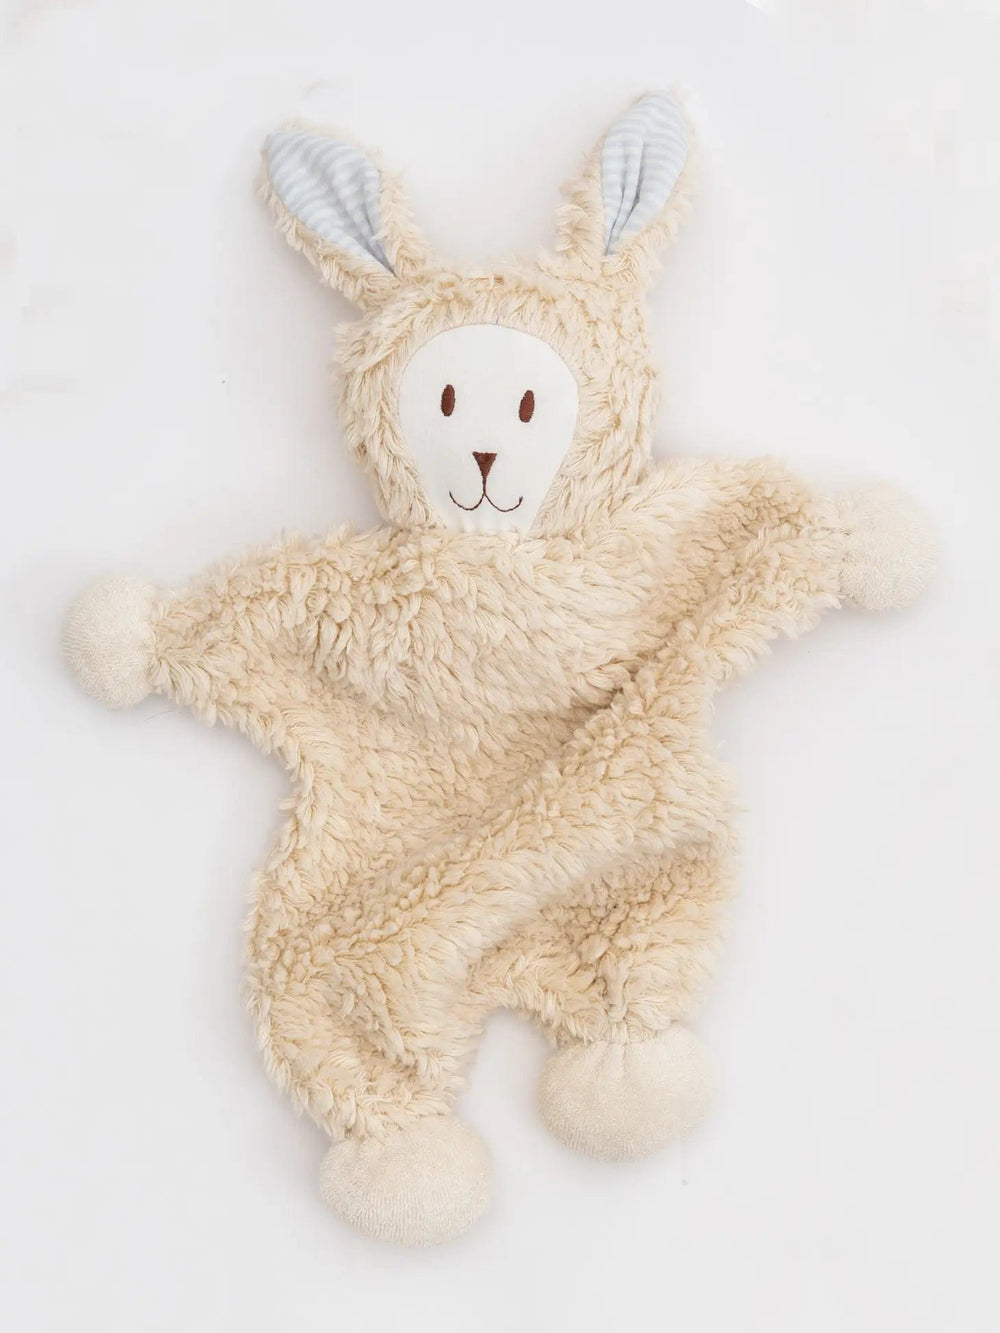 Organic Snuggle Bunny Toy - Blue Stripe Ears Under the Nile Lil Tulips